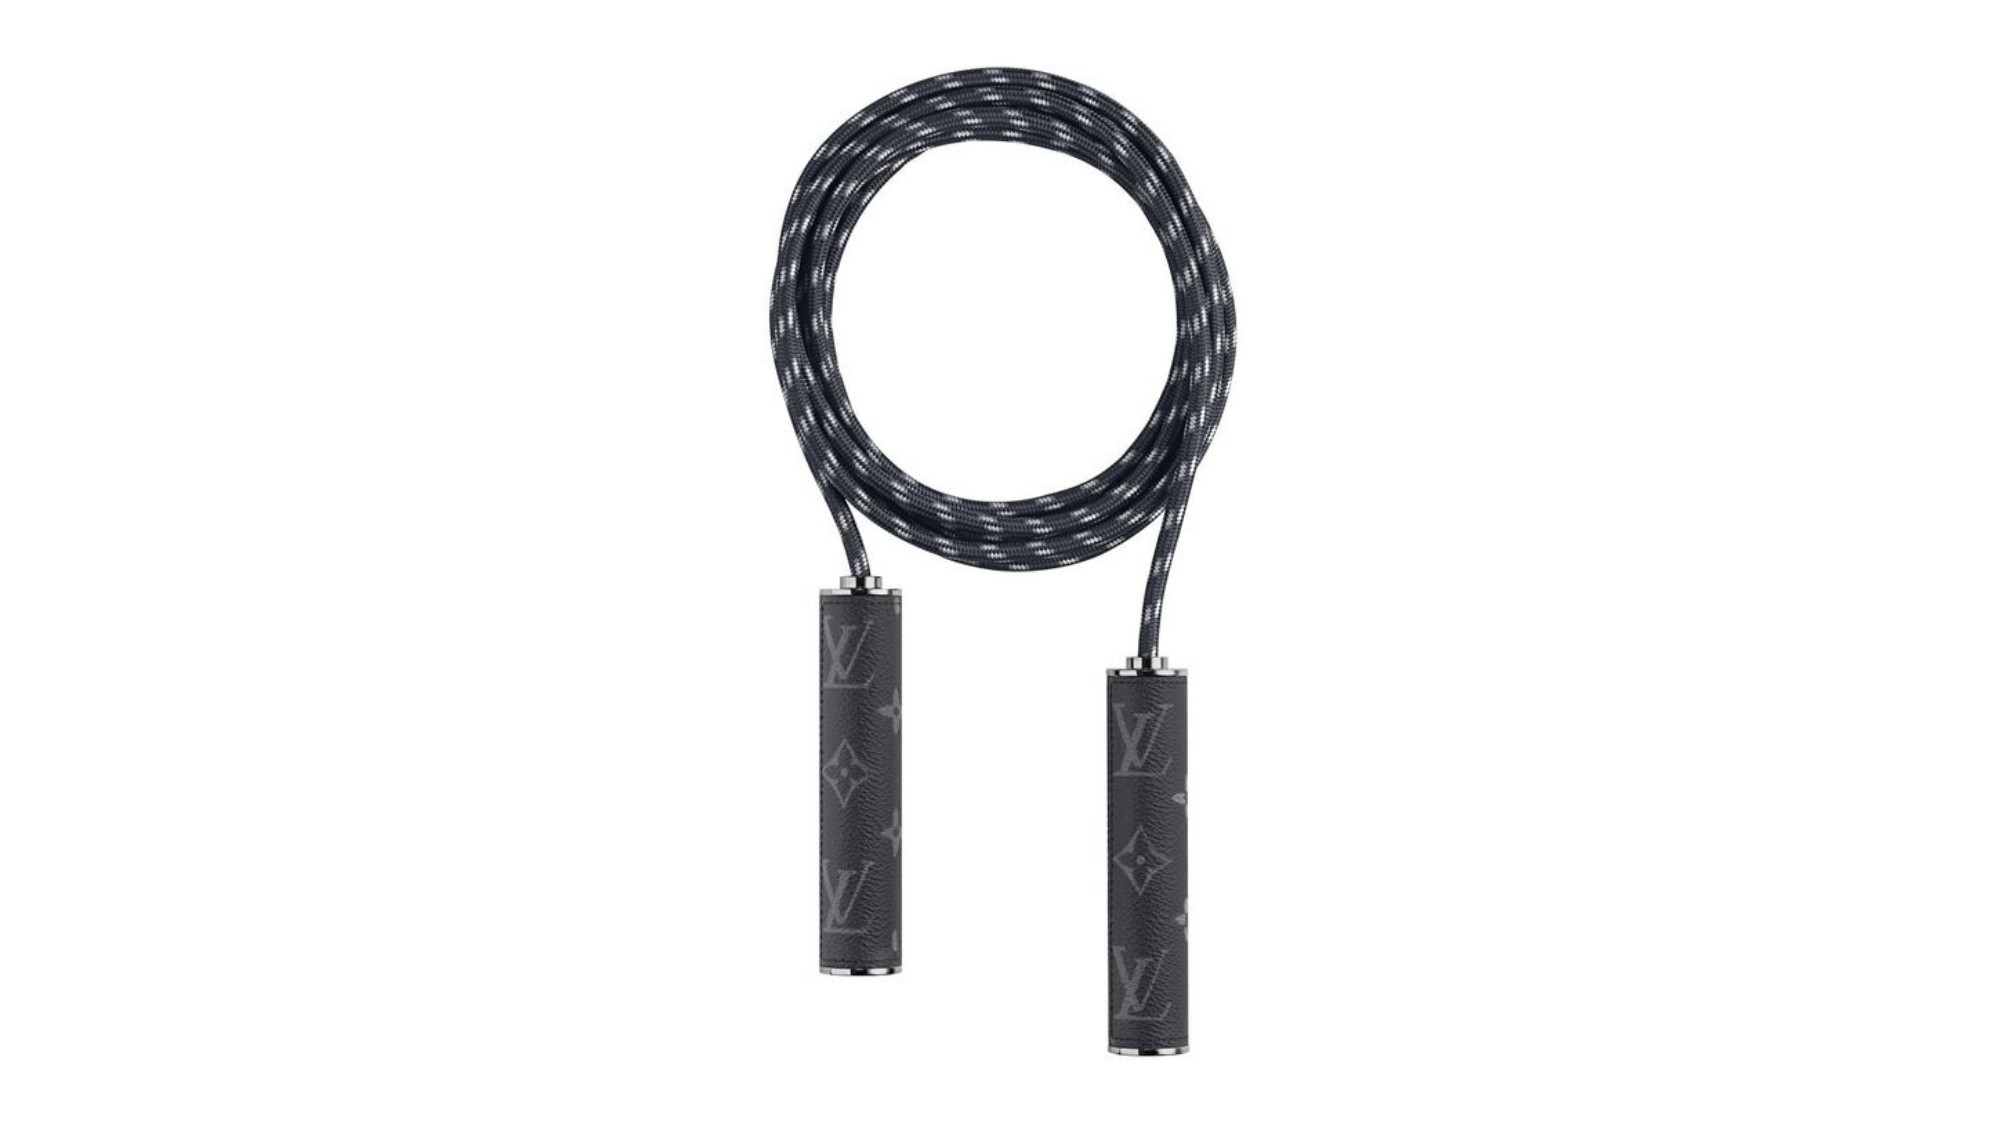 Louis Vuitton’s Christopher jump rope.